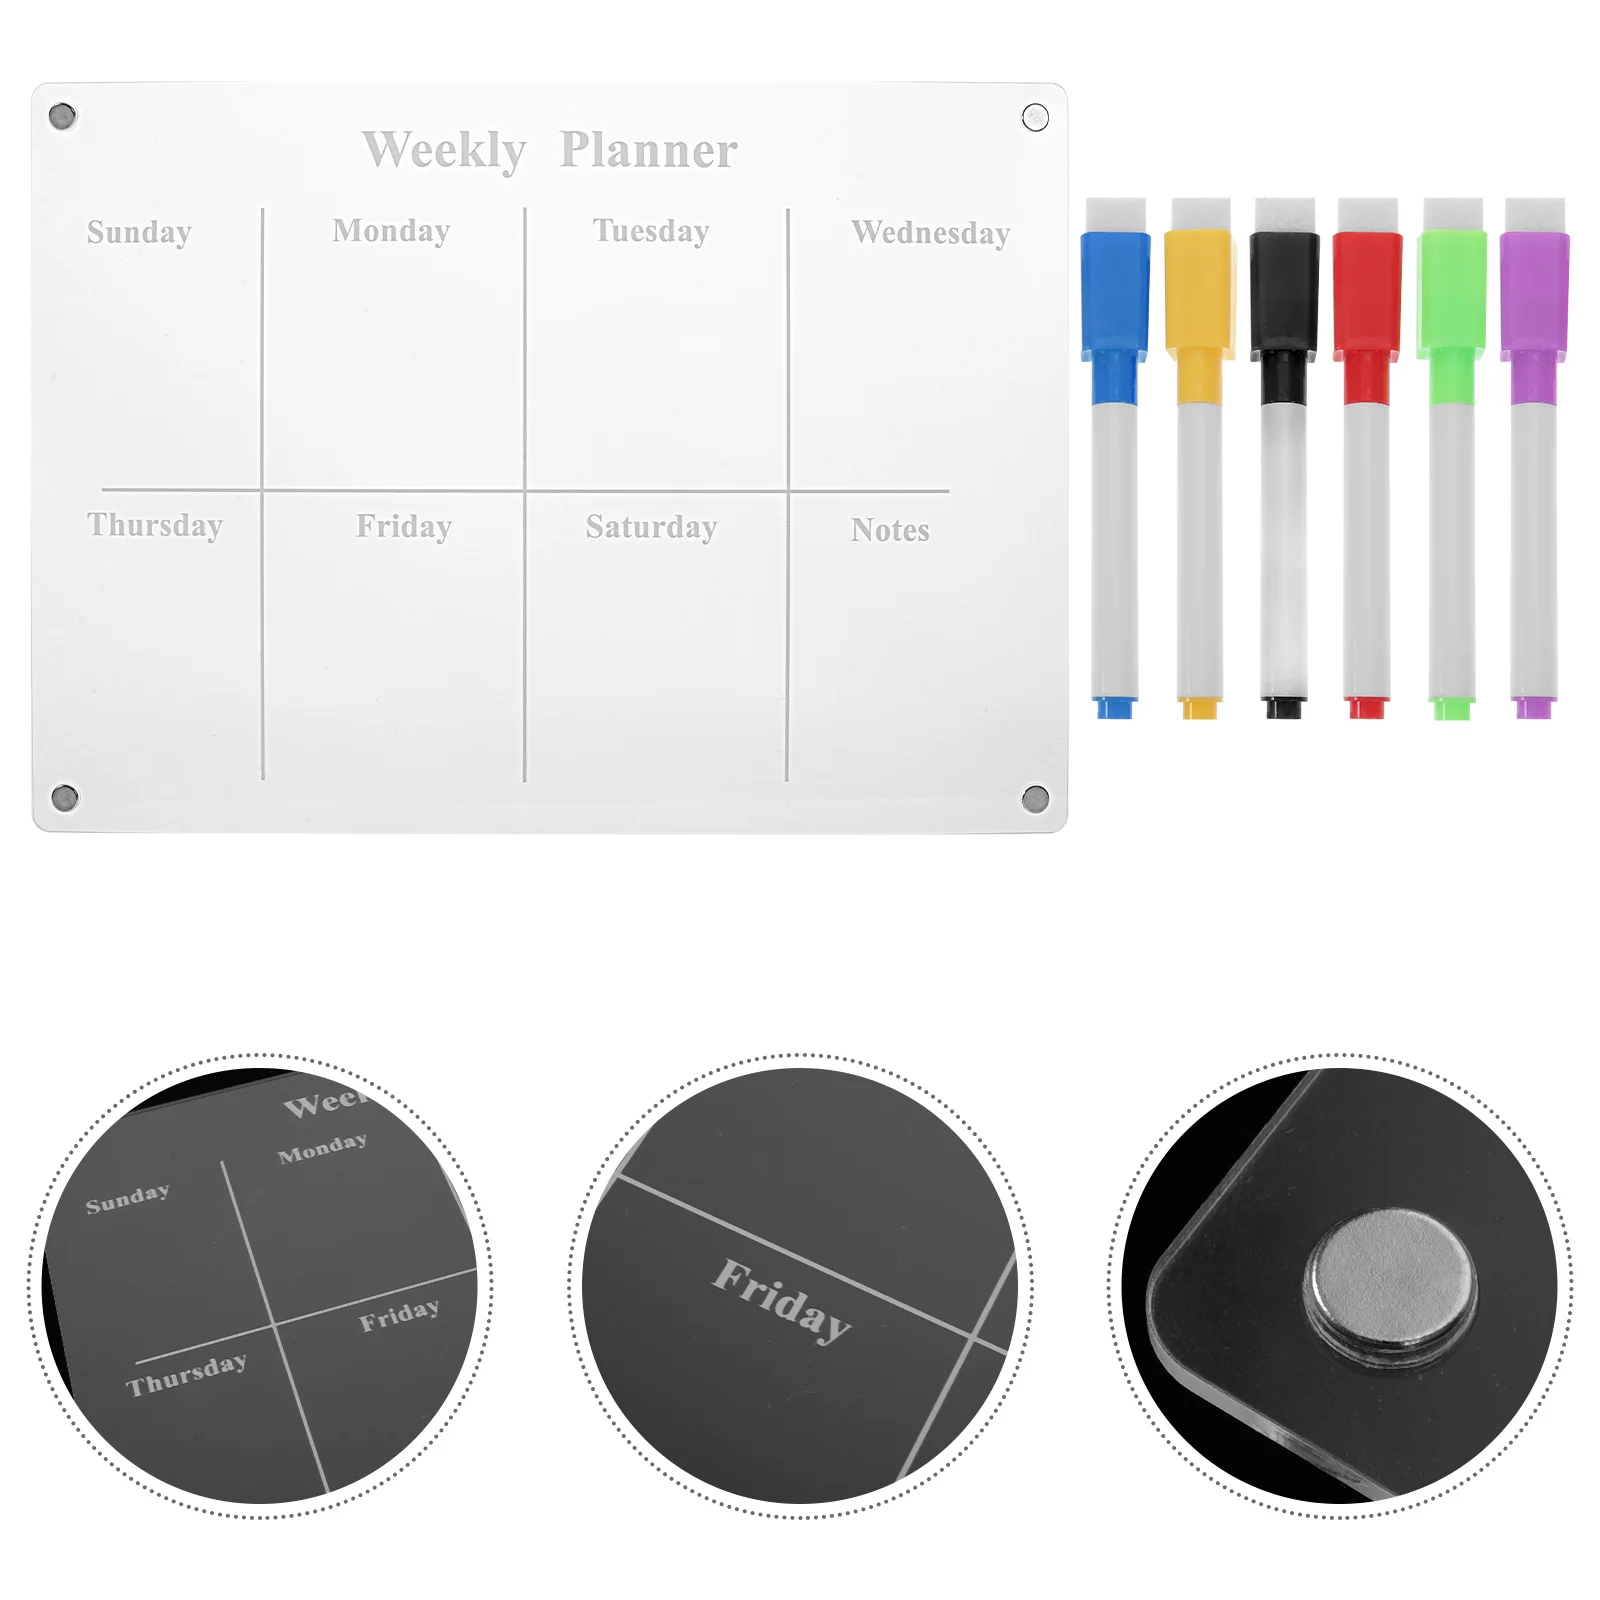 

Acrylic Writing Board Magnetic Schedule Clear Planner Fridge Dry Erase Wall Daily Refrigerator Whiteboard Calendar